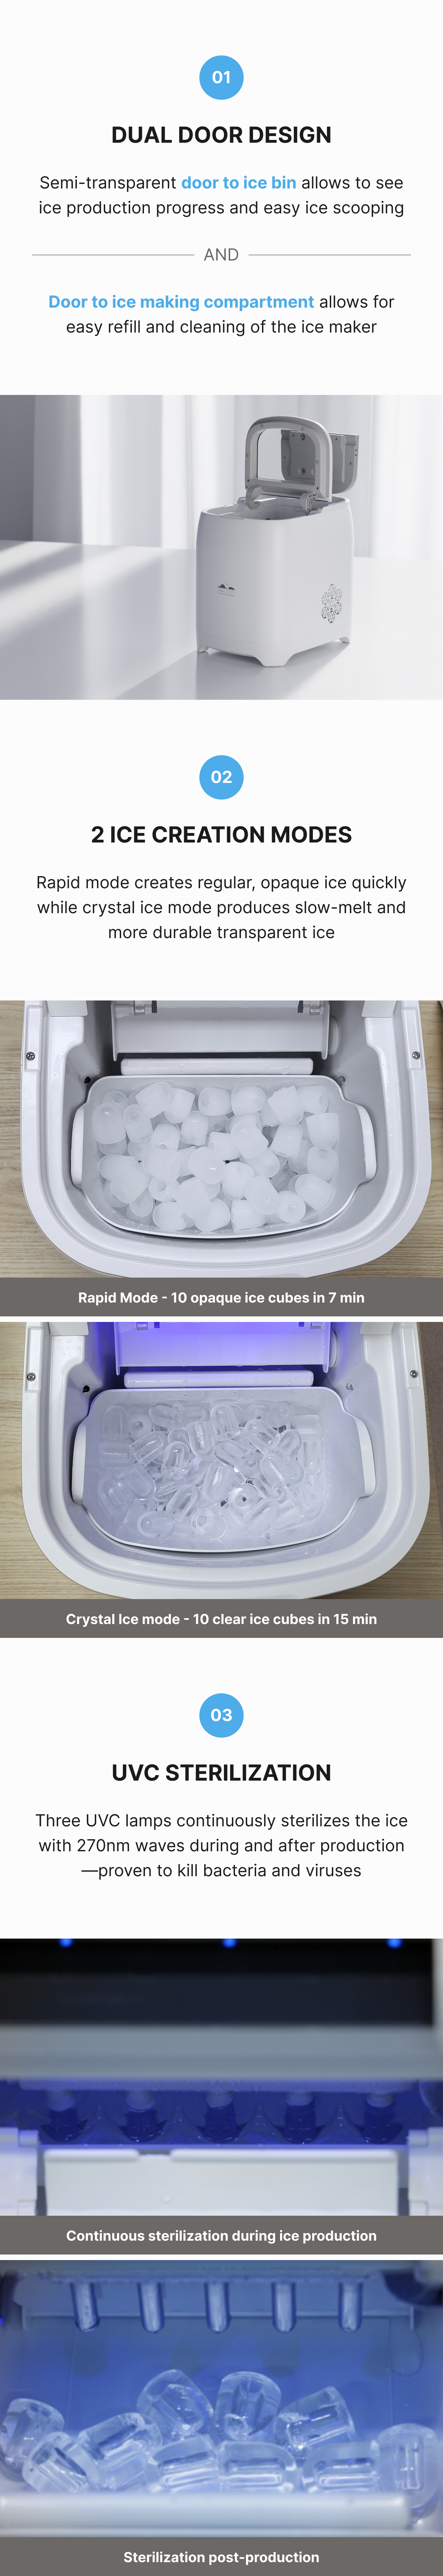 Dokdo Freeze product description image showing how dual door design gives access to the ice bin and ice making compartment for easy cleaning, how the two modes creates 10 cubes of hard, durable ice in 15 minutes or quick opaque ice in 7 minutes, and how the unit uses a triple UVC light system continuously during the ice making process.